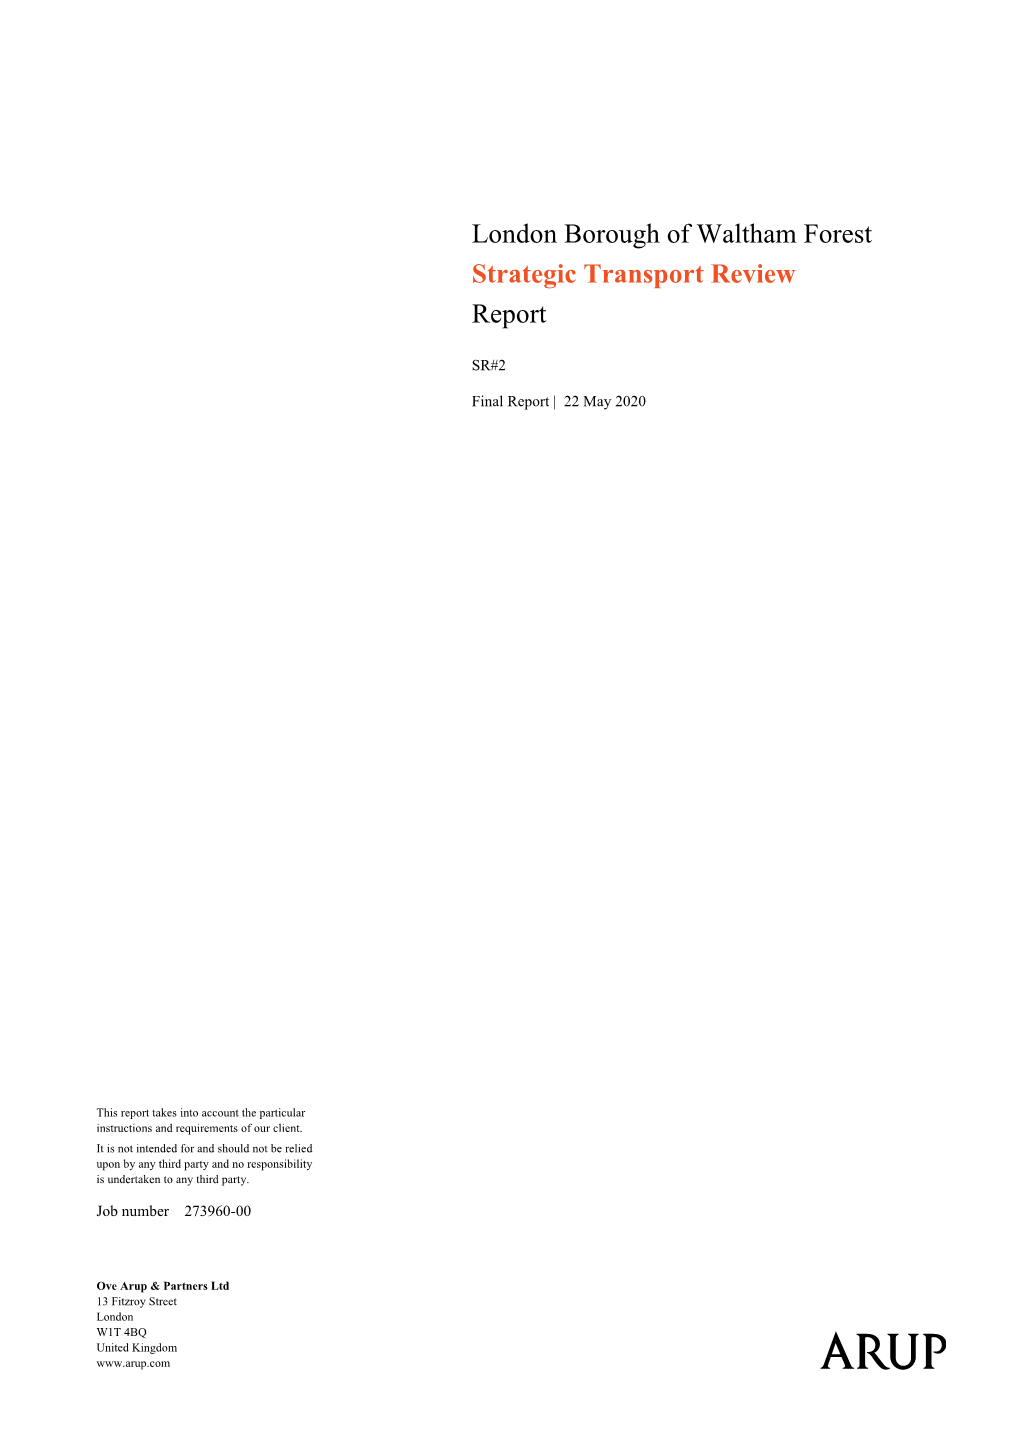 London Borough of Waltham Forest Strategic Transport Review Report